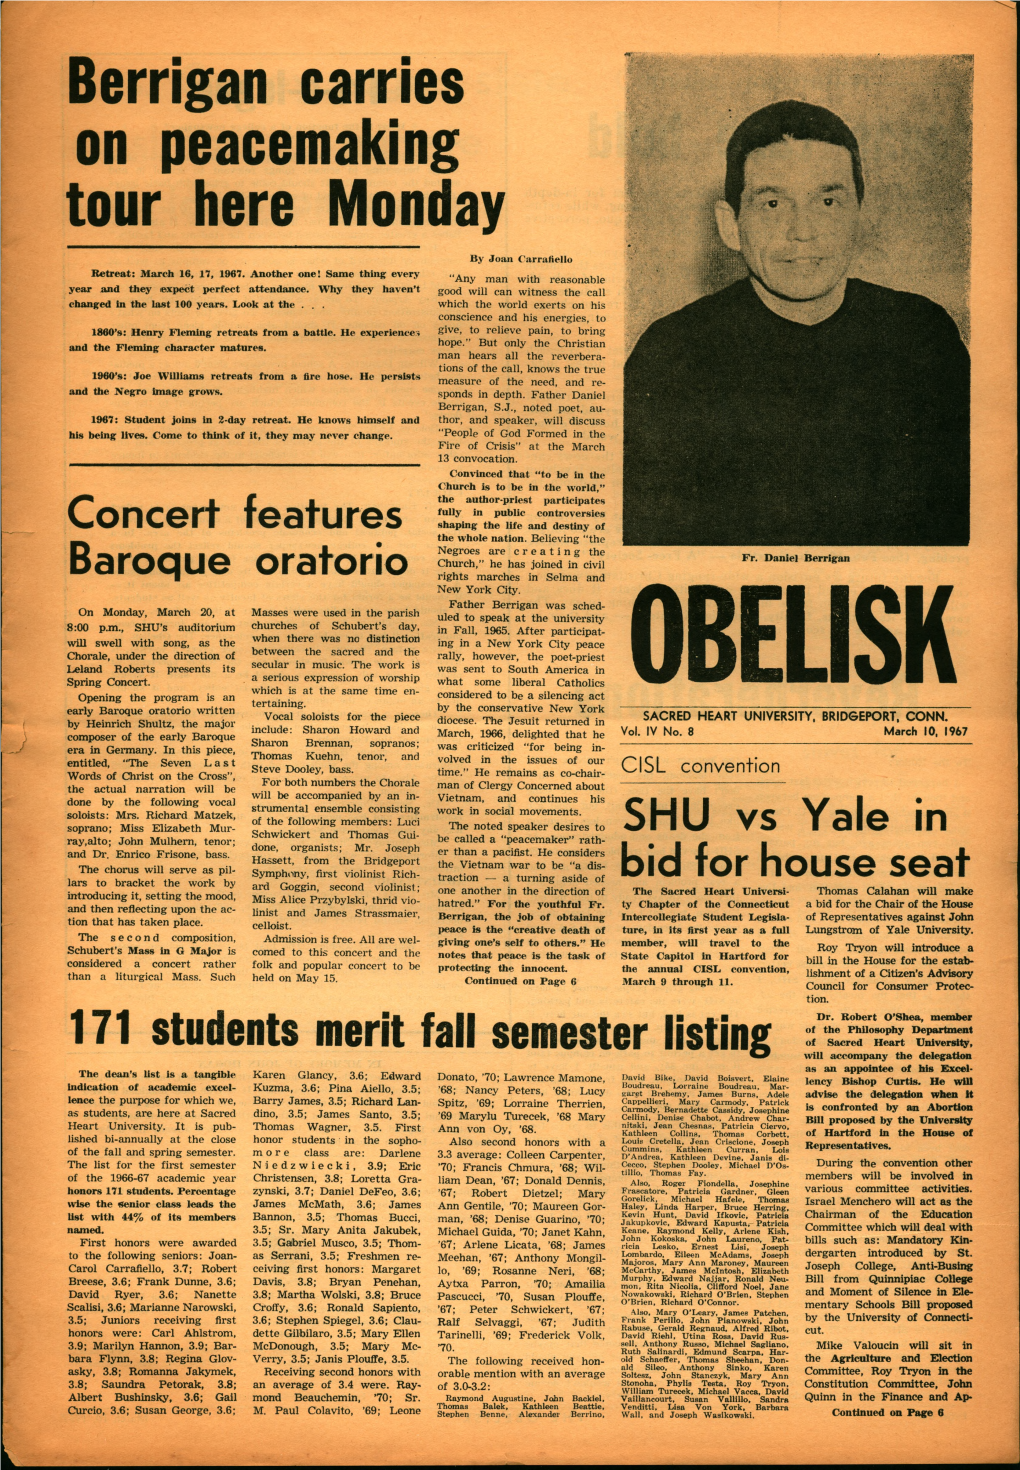 Berrigan Carries on Peacemaking Tour Here Monday by Joan Carraflello Retreat: March 16, 17, 1967